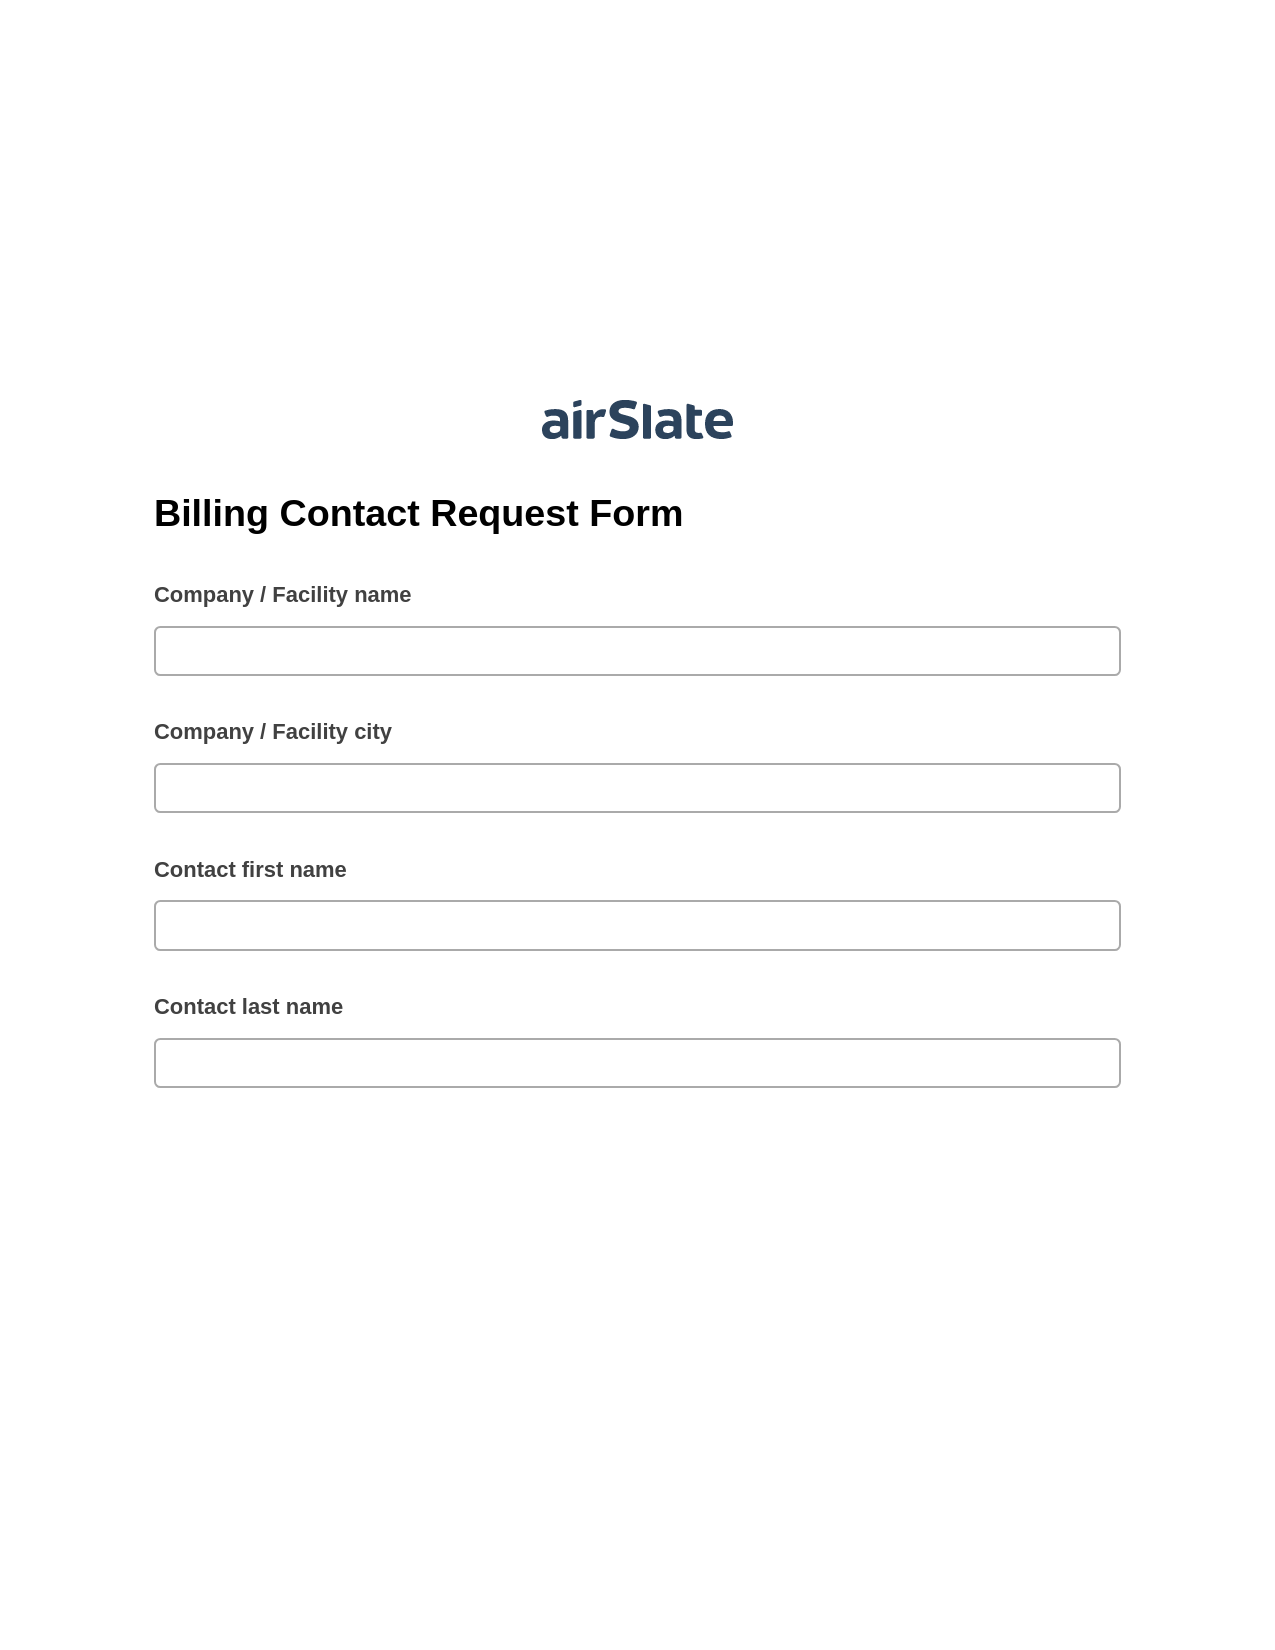 Multirole Billing Contact Request Form Pre-fill from NetSuite Records Bot, Export to MS Dynamics 365 Bot, Export to Smartsheet